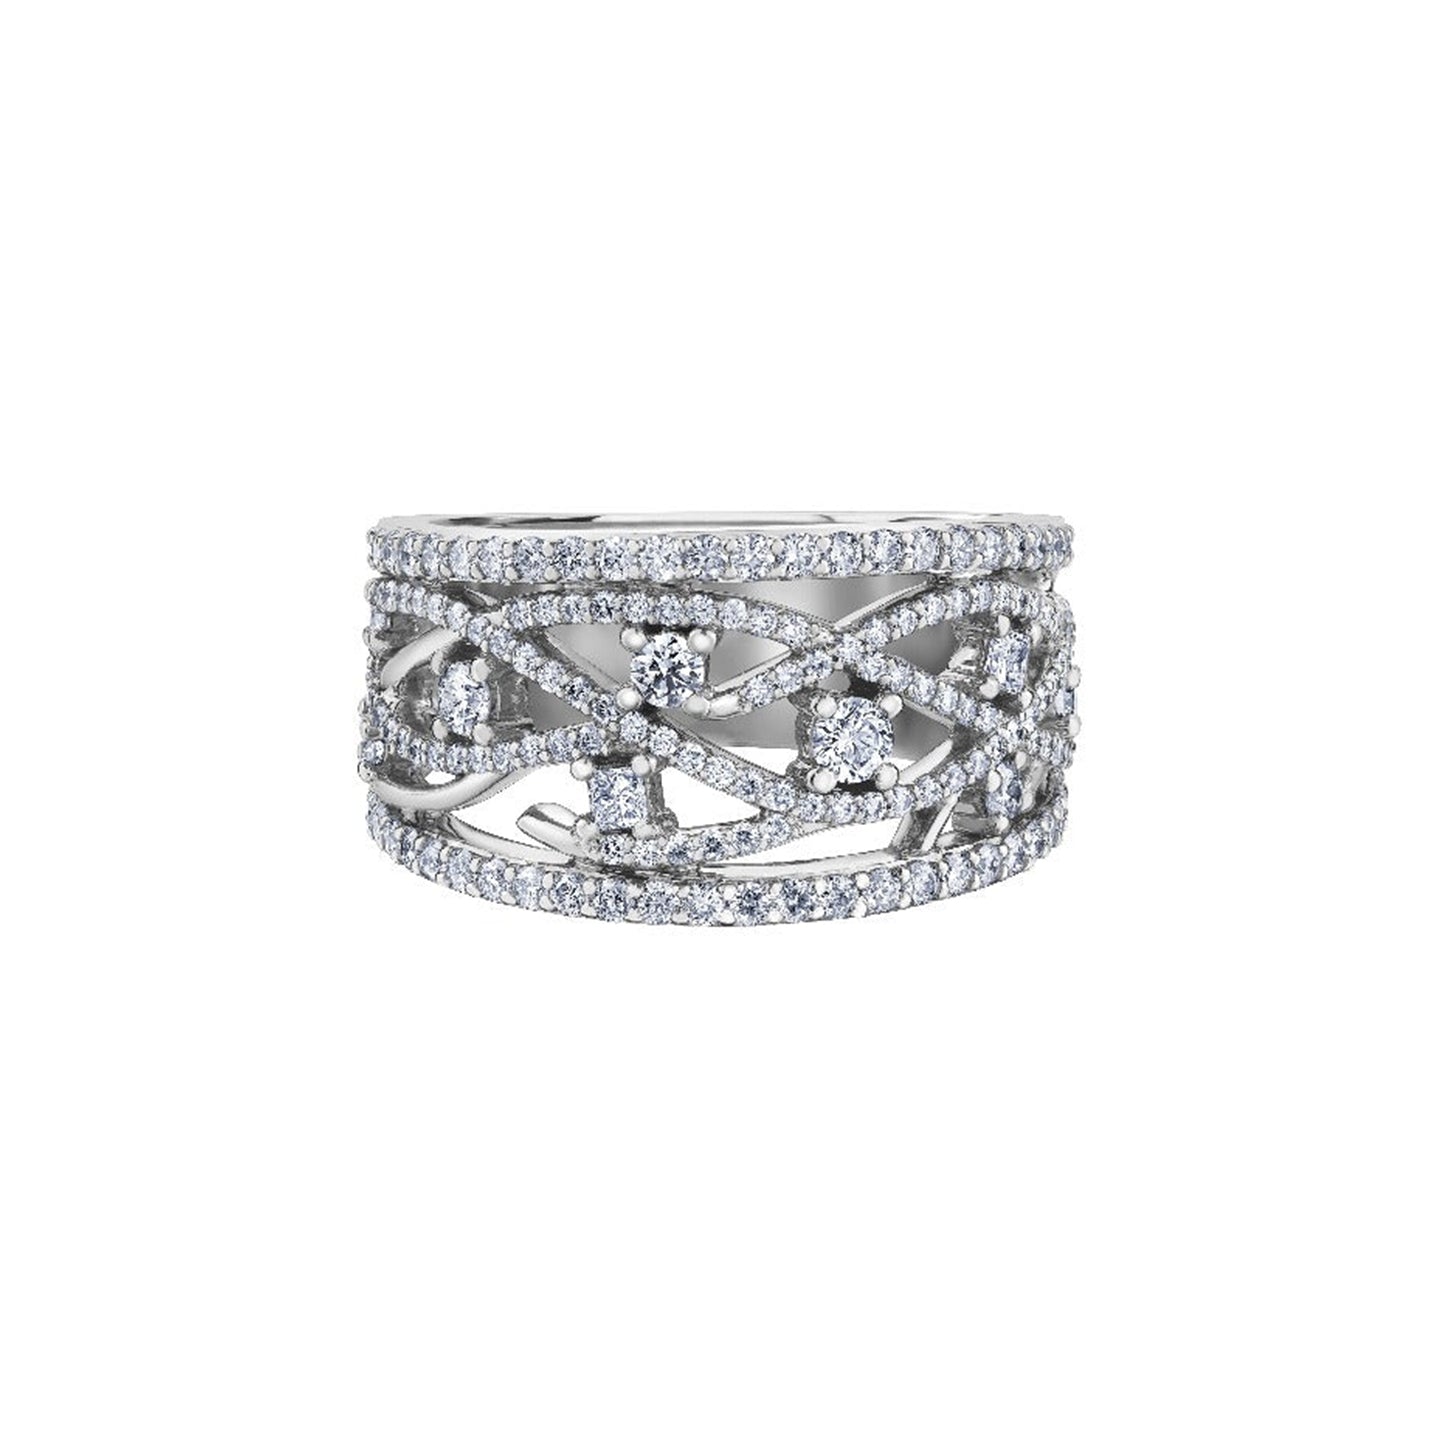 Crafted in 14KT white Certified Canadian Gold, this ring features a winter design set with round brilliant-cut Canadian diamonds.